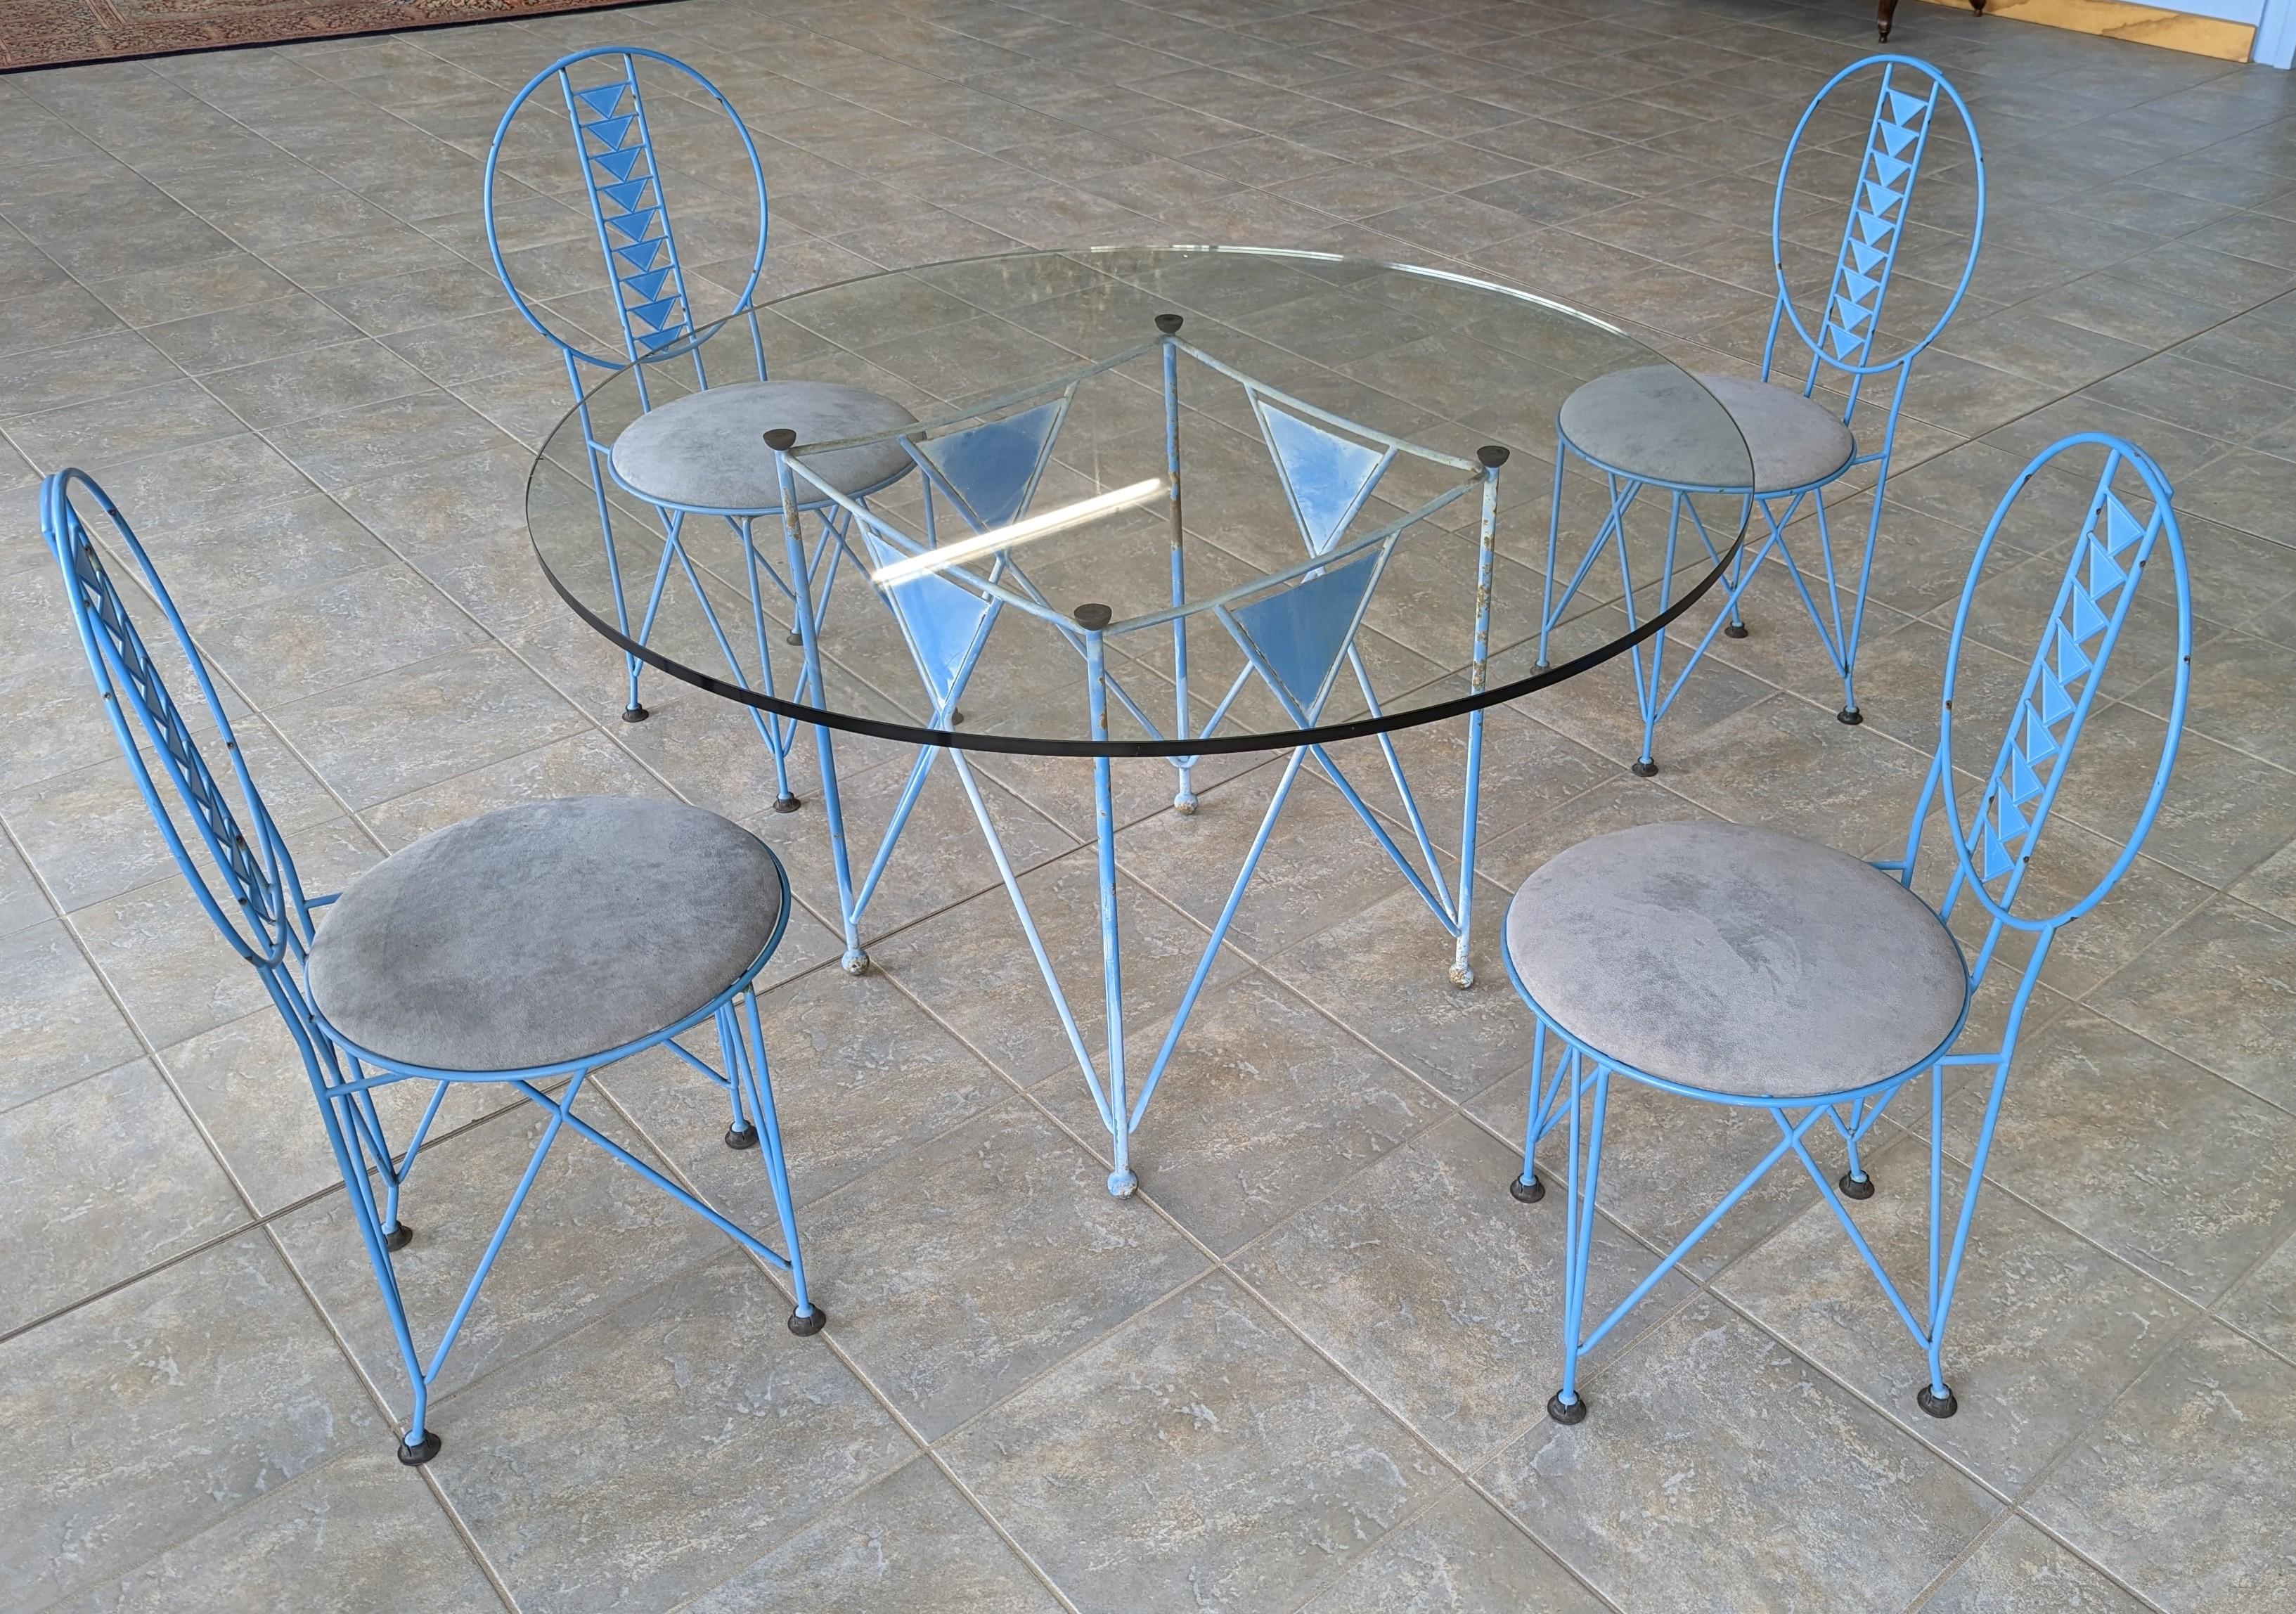 Prairie School Frank Lloyd Wright Cassina Midway 2 and 3 Steel Dining Set in Blue Color, 1986